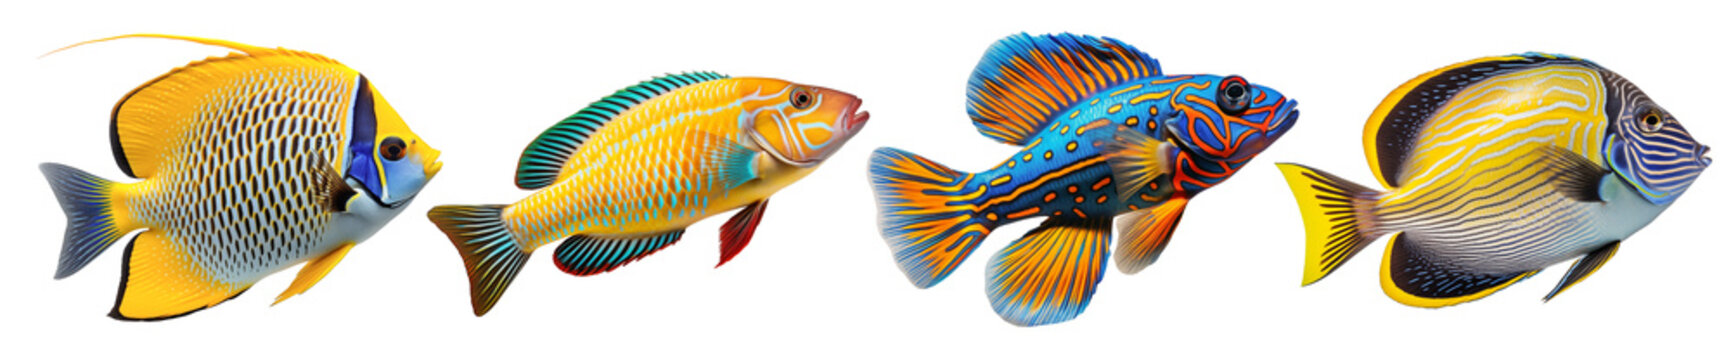 Multicolored aquarium fishes on a transparent background, side view. The Acanthurus, Angelfish, Mandarinfish, King Wrasse saltwater aquarium fish, isolated on a white background.